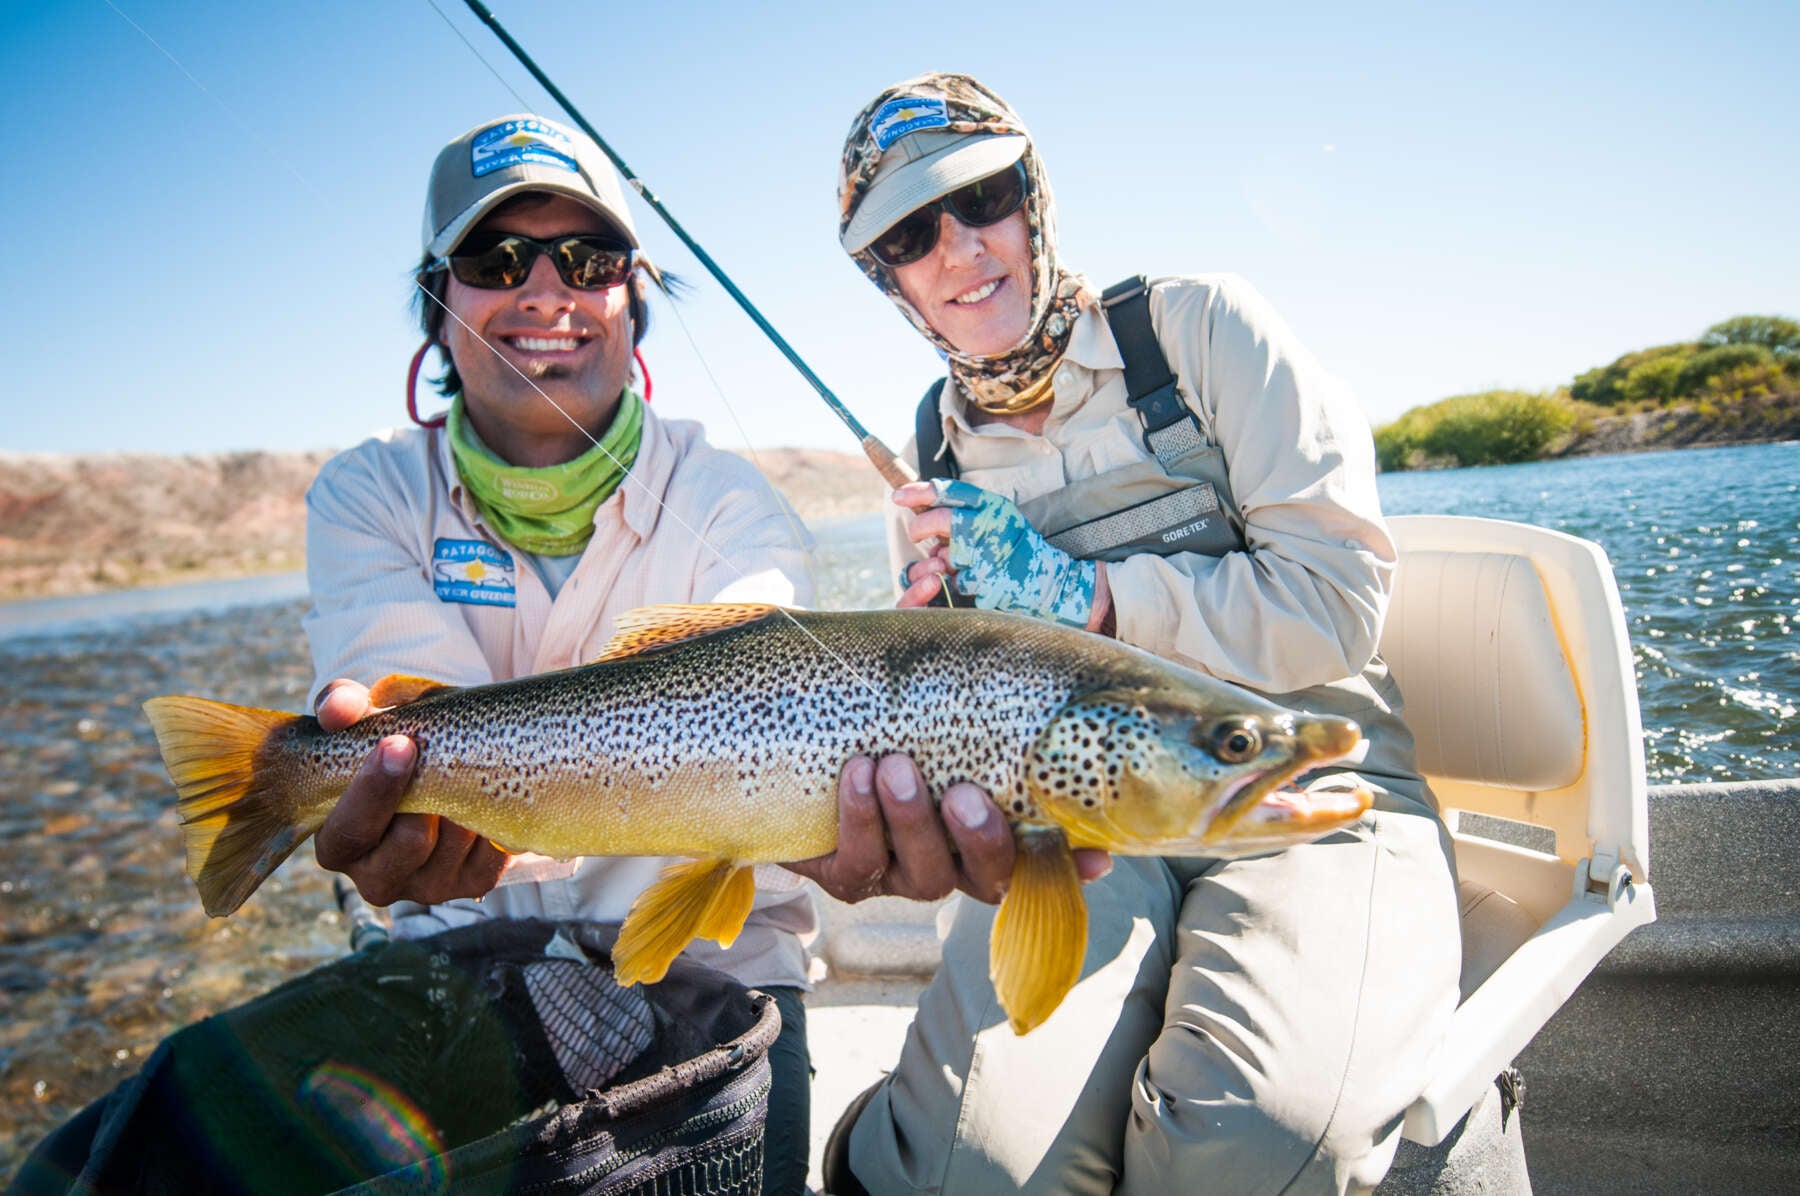 The 4 feathers legacy - Argentina Trout Fishing